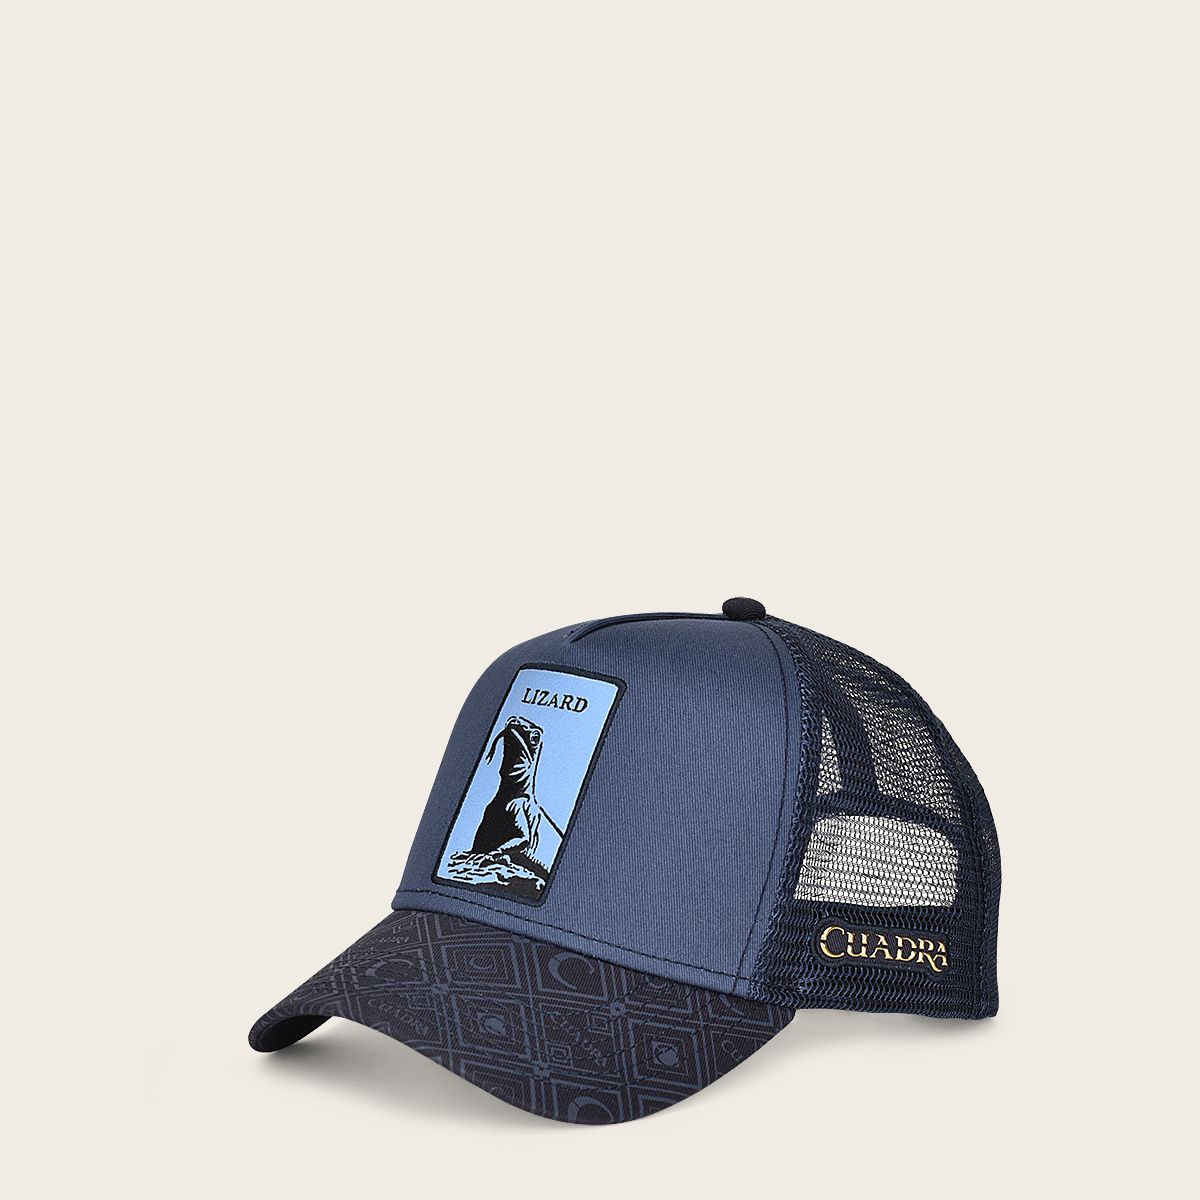 Blue snapback cap with lizzard patch